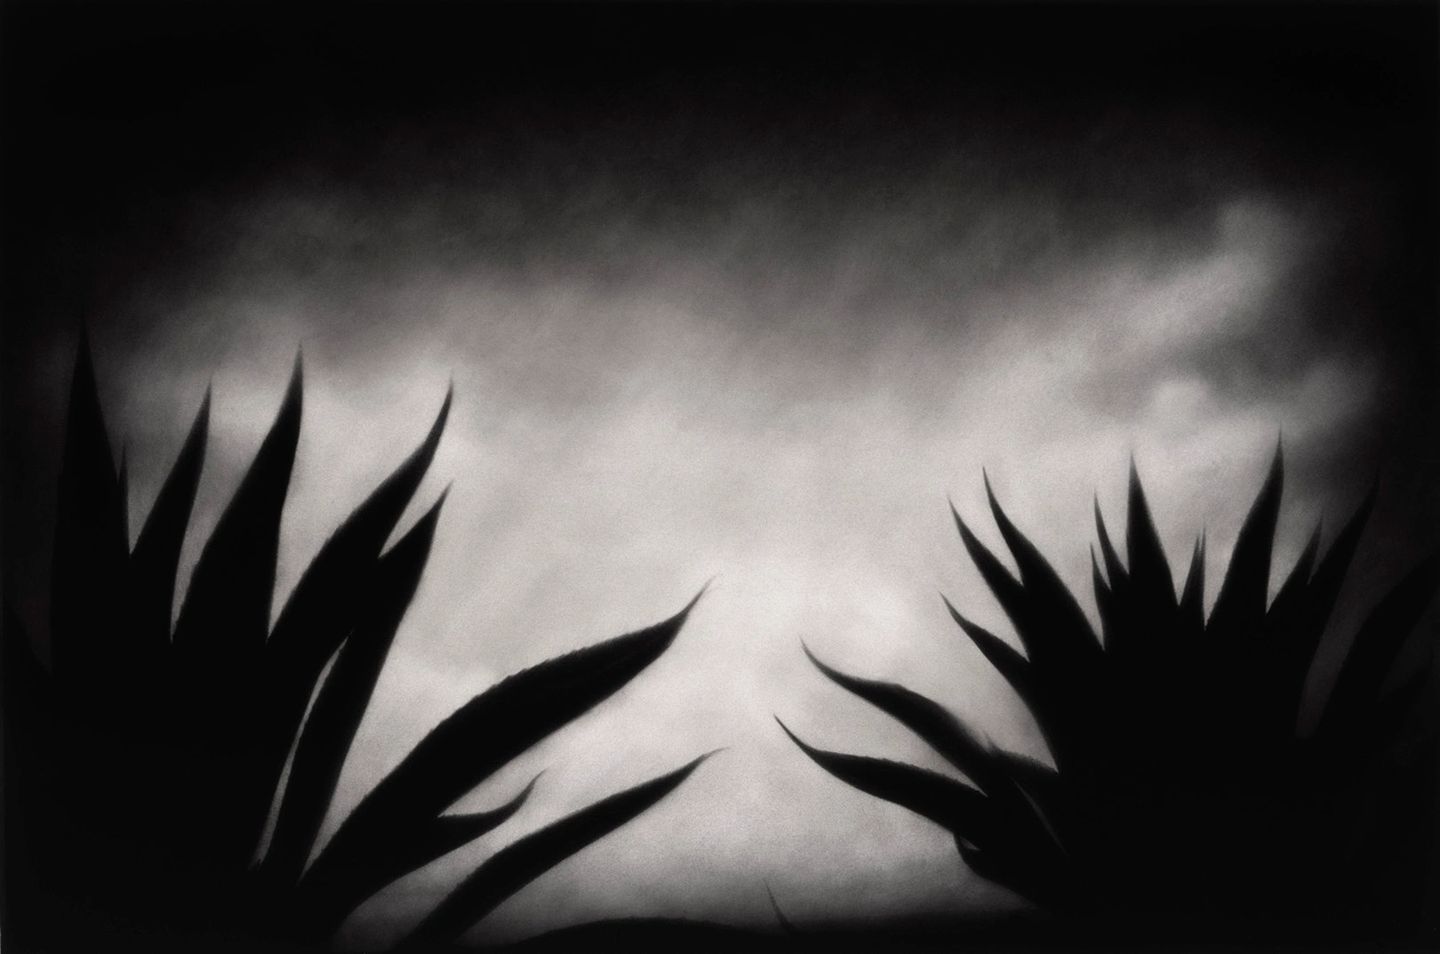 A black and white photo of two plants in the foreground.